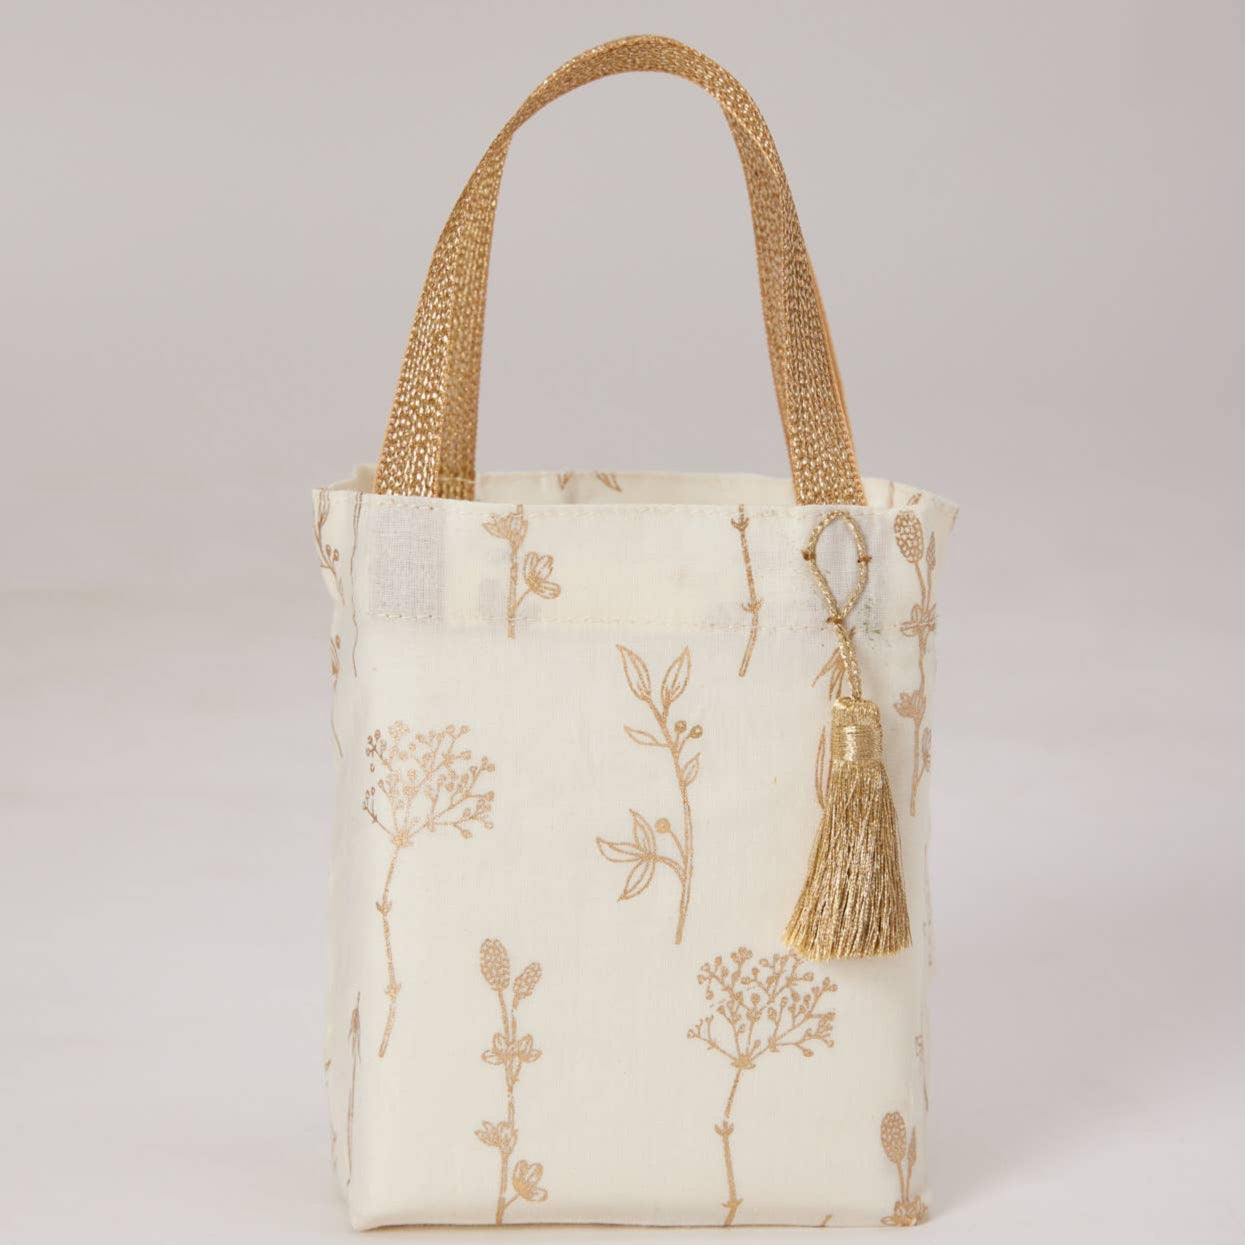 Wildflowers - Reusable Fabric Gift Bags Tote Style By Paper Mirchi